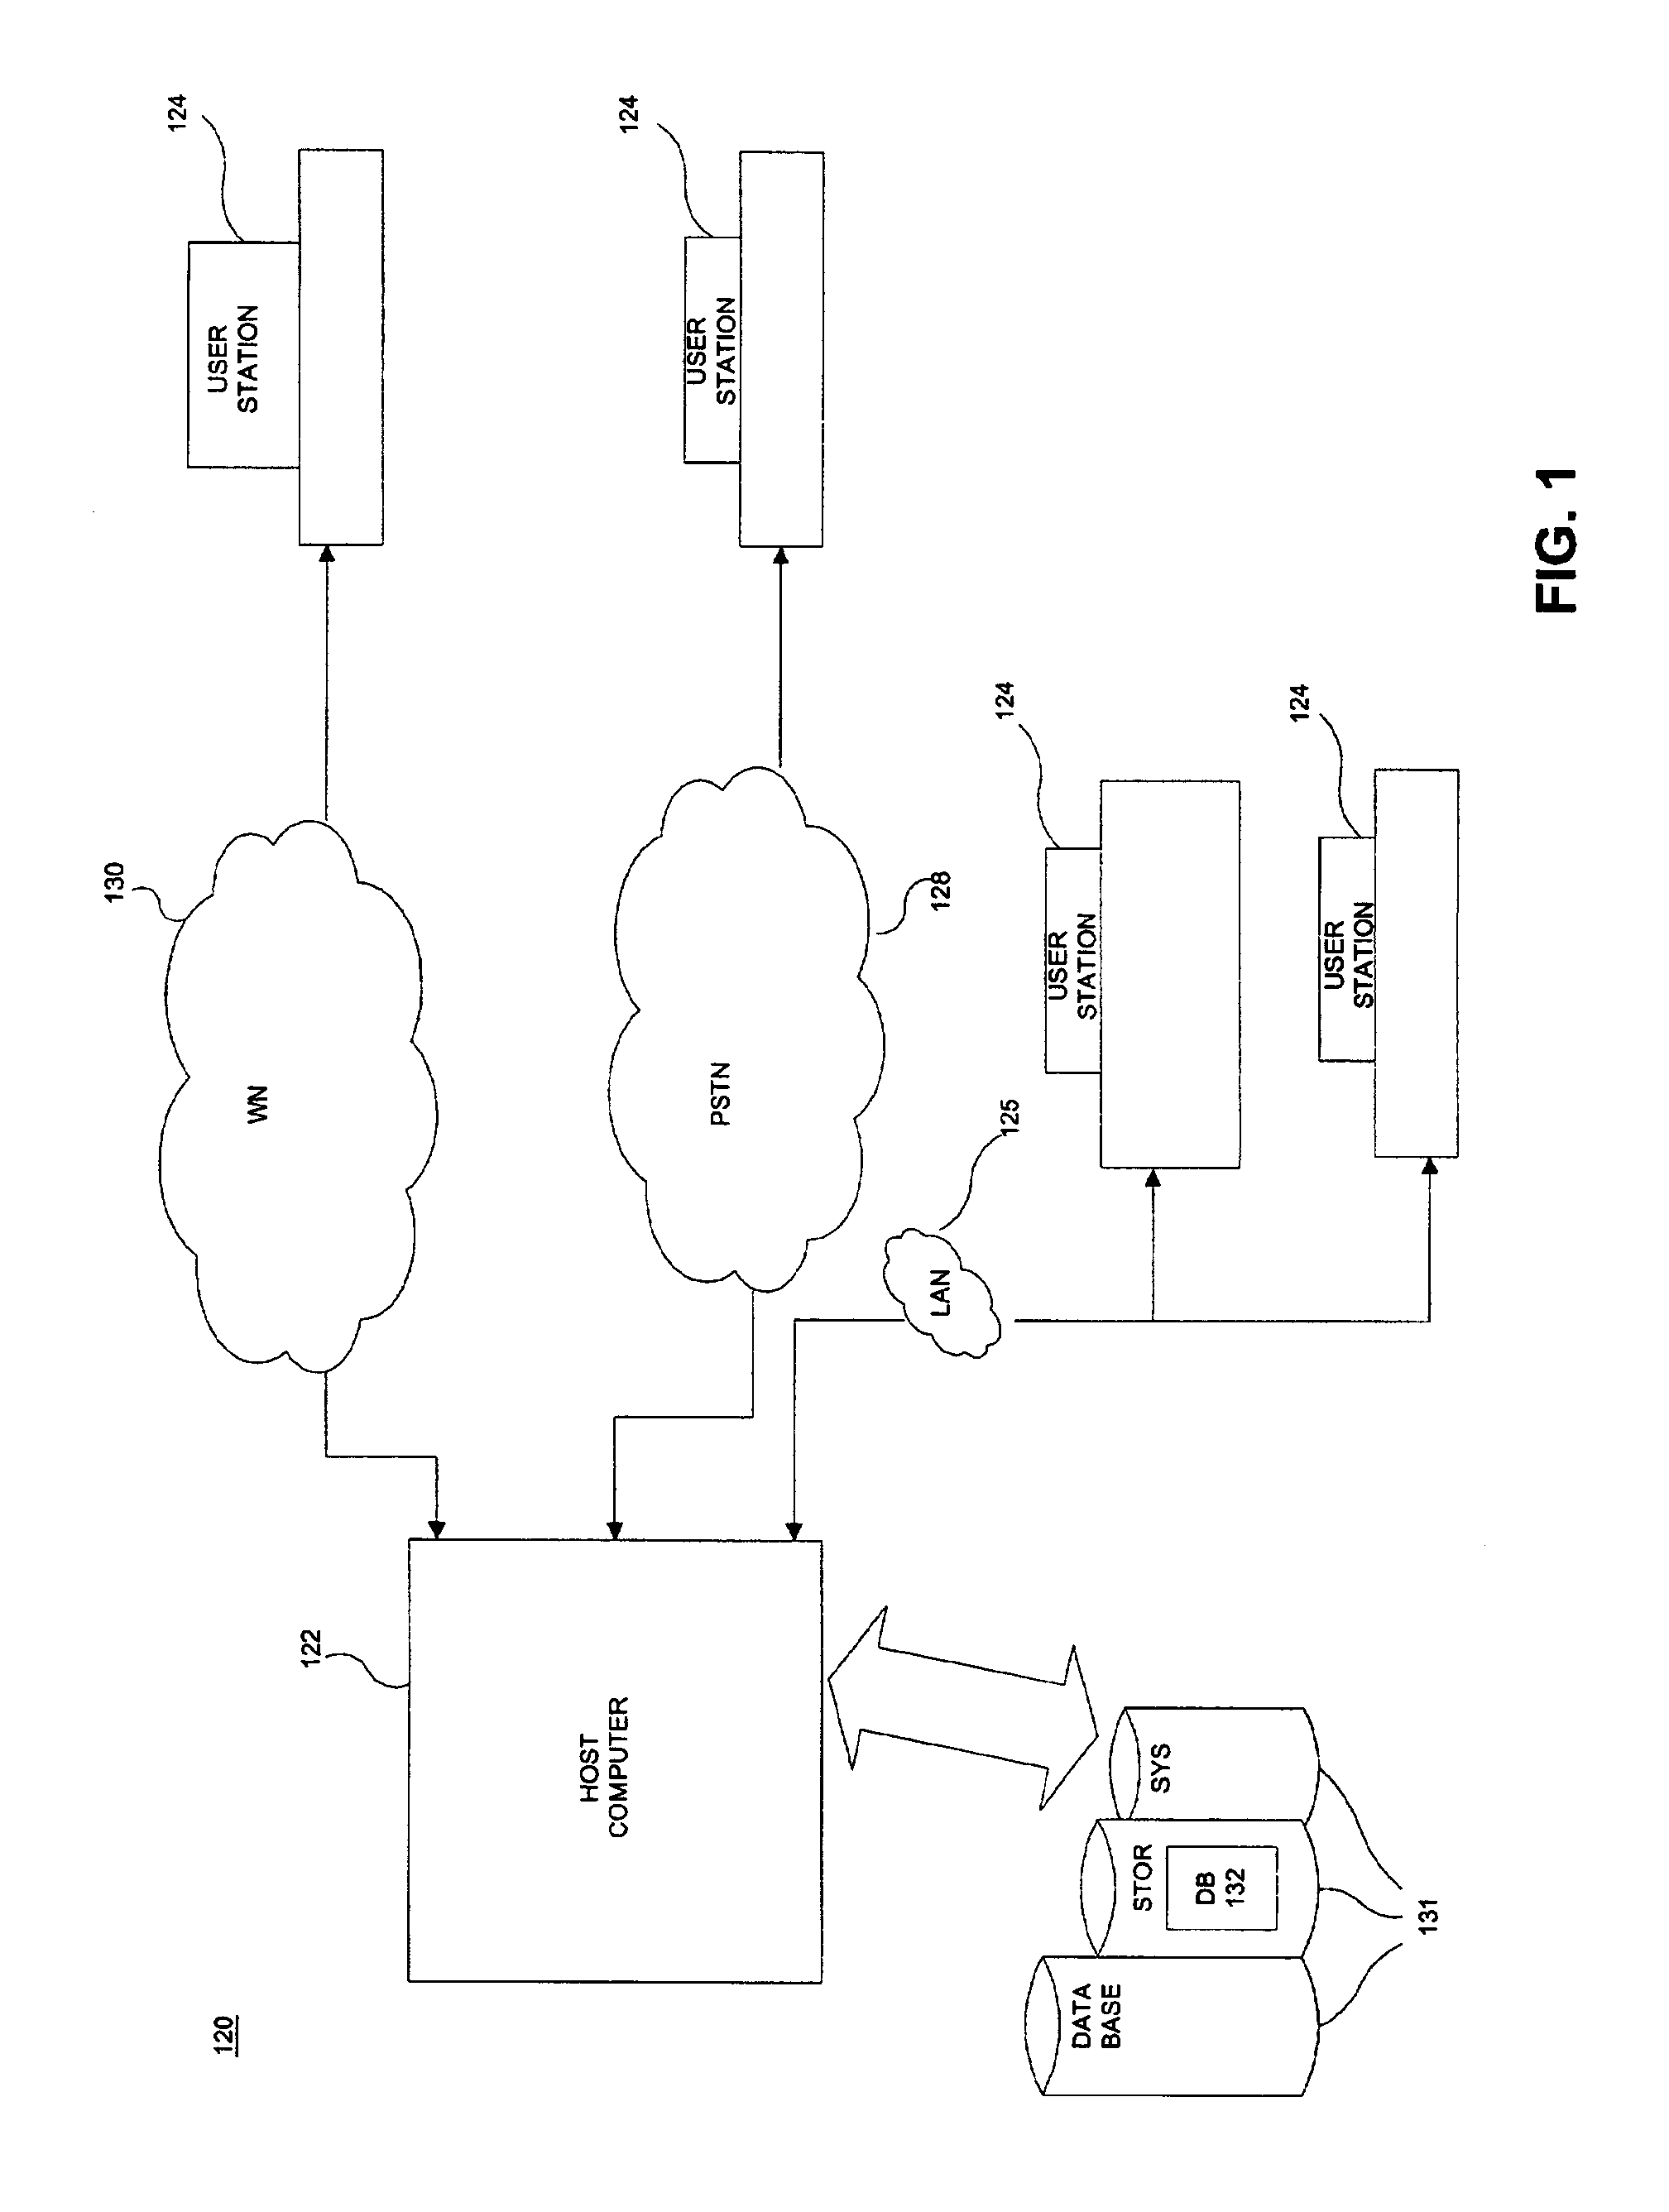 Systems and methods for managing partitioned indexes that are created and maintained by user-defined indexing schemes